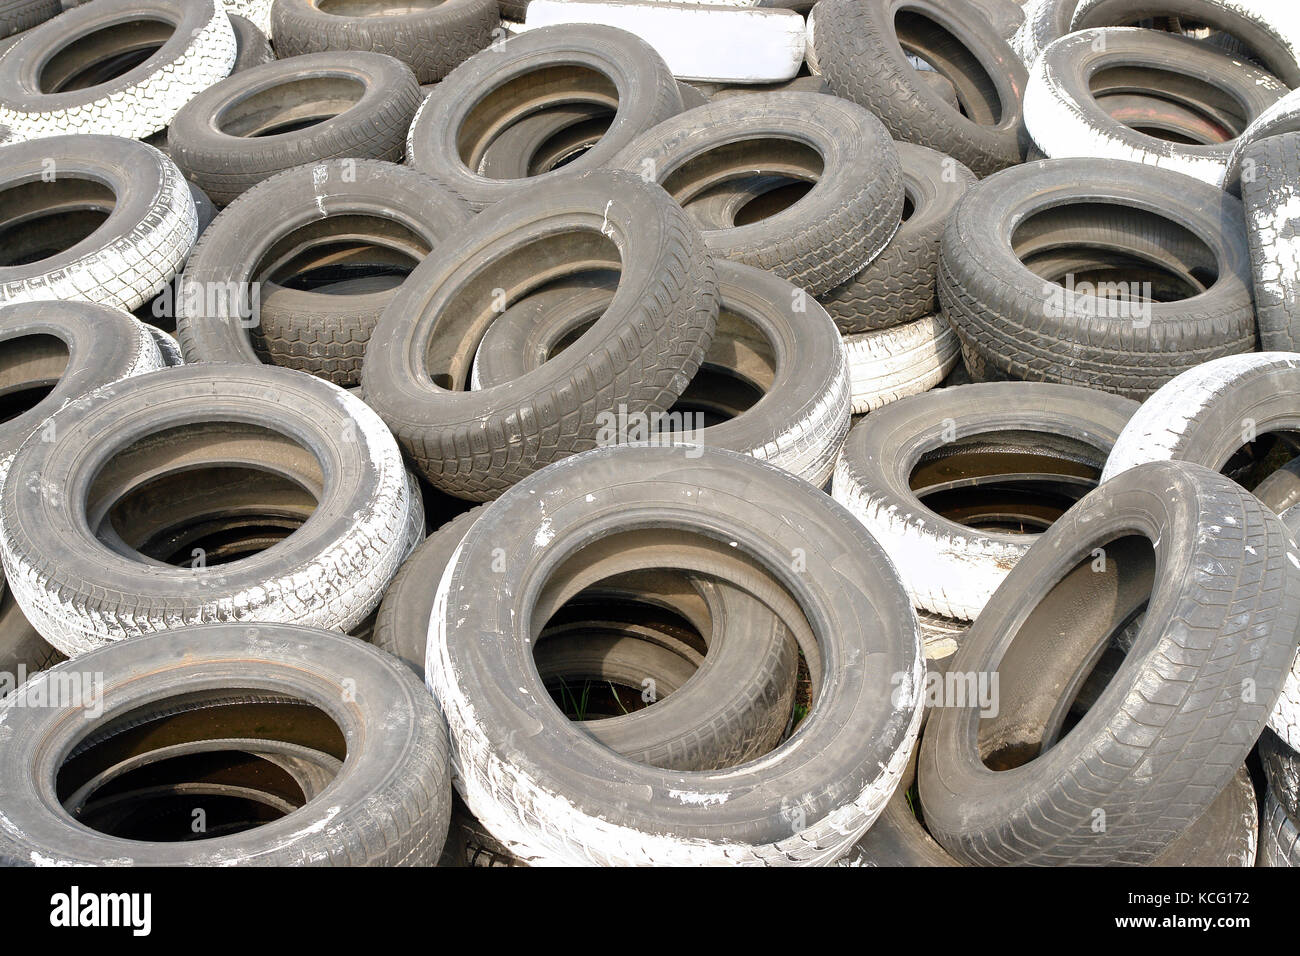 Heap of used car tires Stock Photo